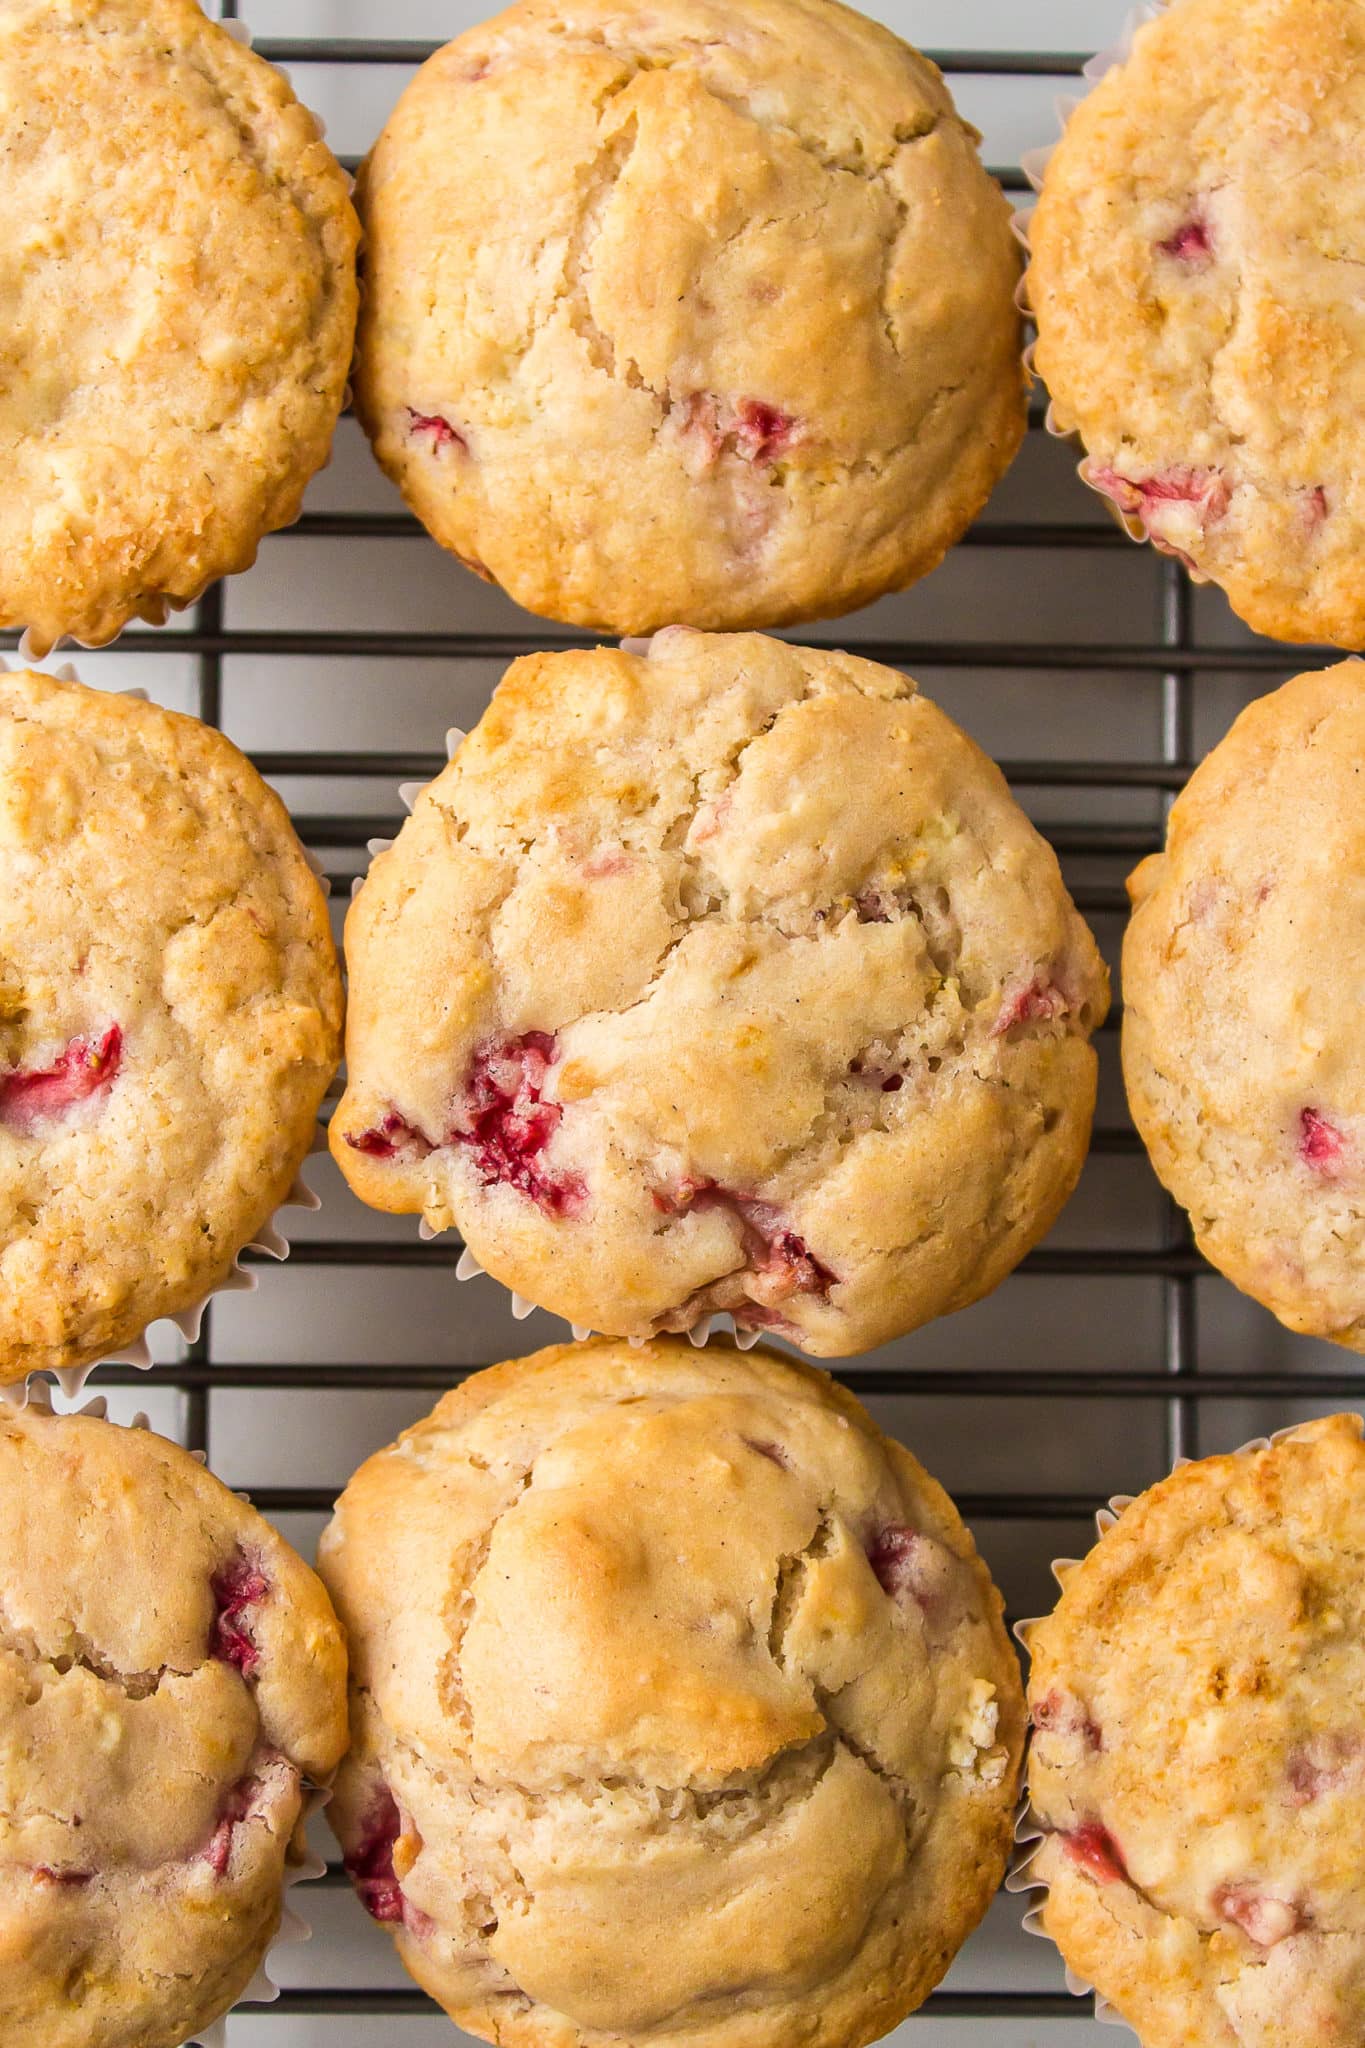 Gluten-free strawberry muffins lined up on a cooling rack.